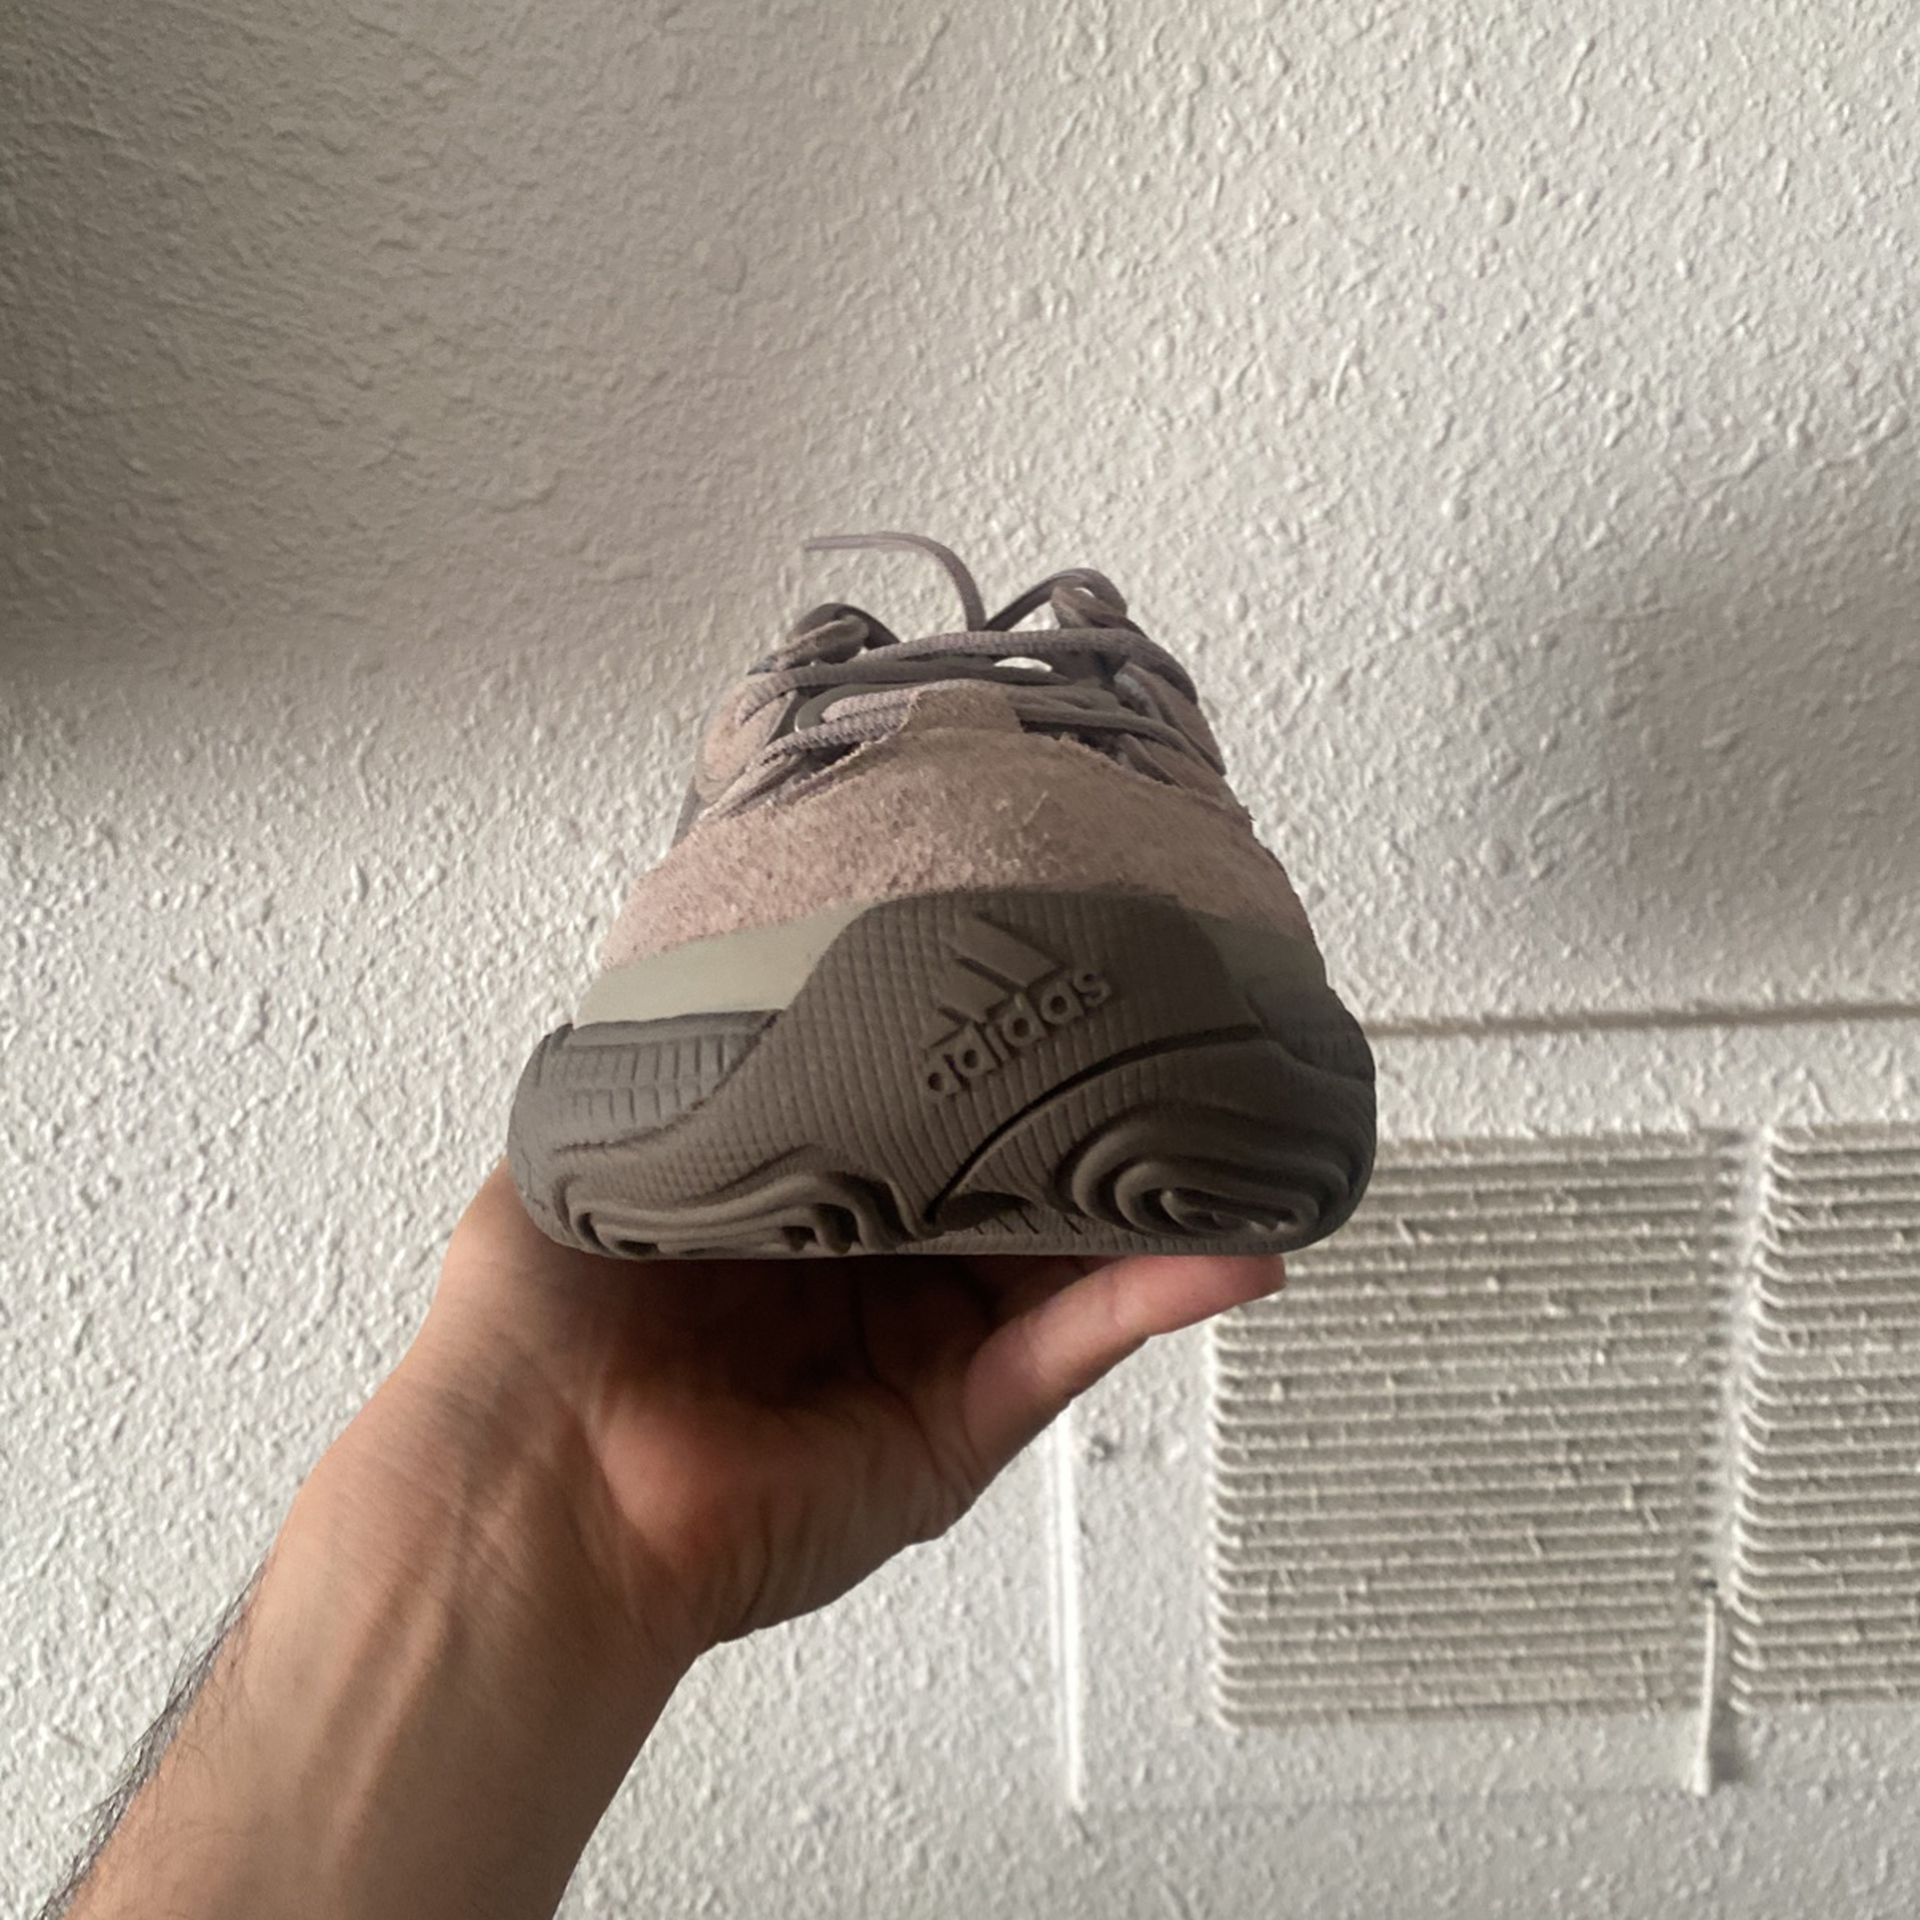 Yeezy 500 Ash Grey for Sale in San Clemente, CA - OfferUp